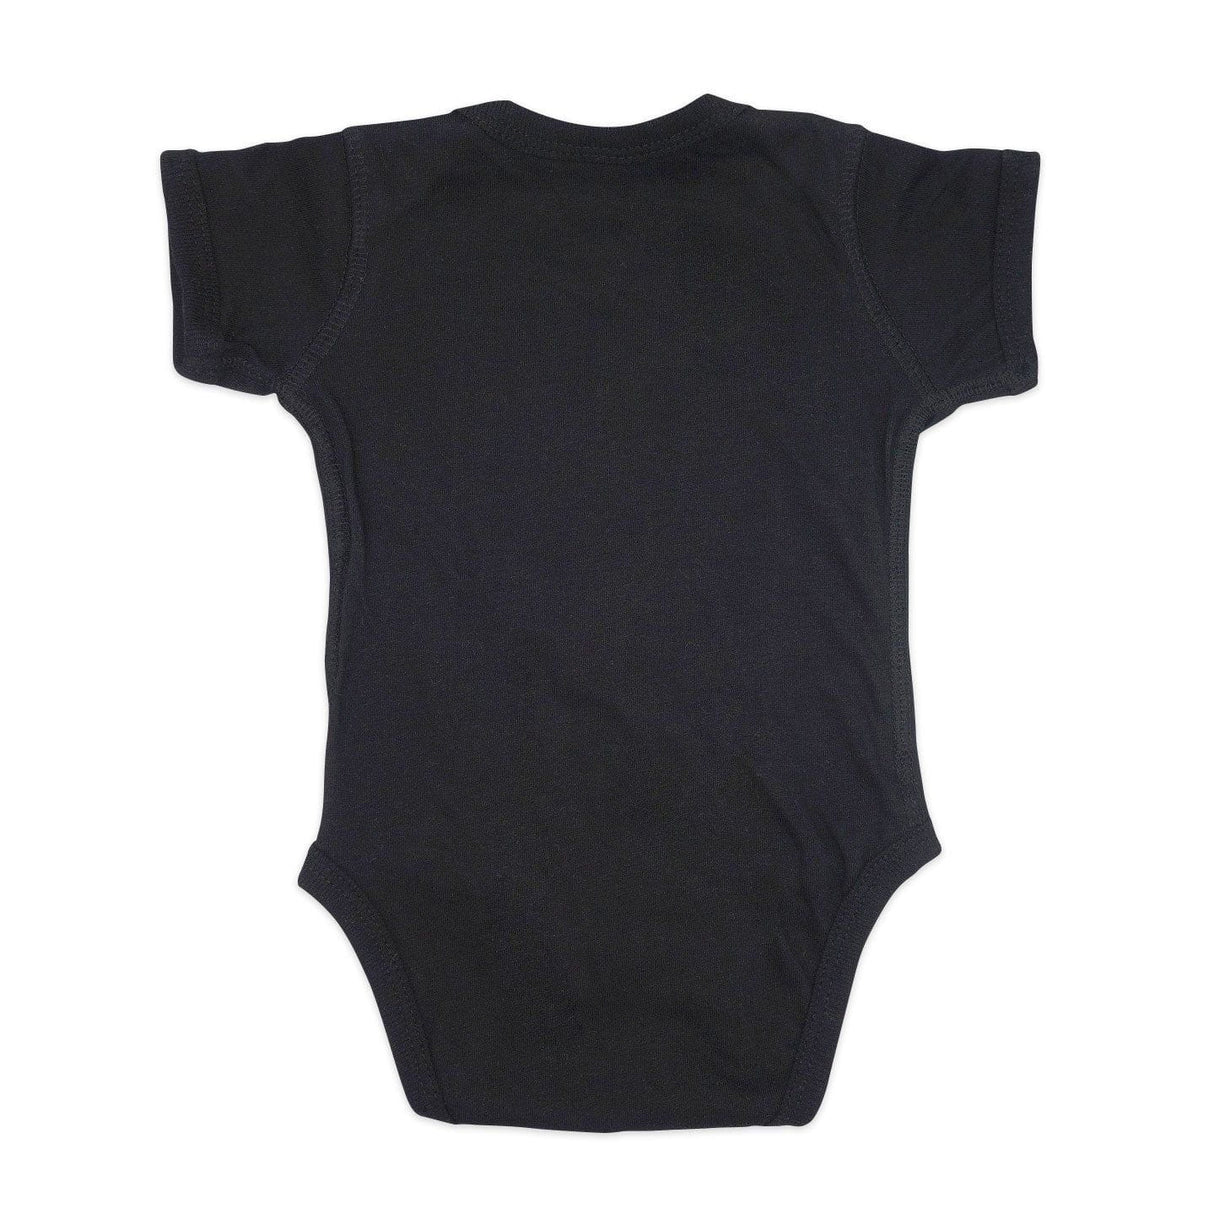 Canadian Made Baby Onesie